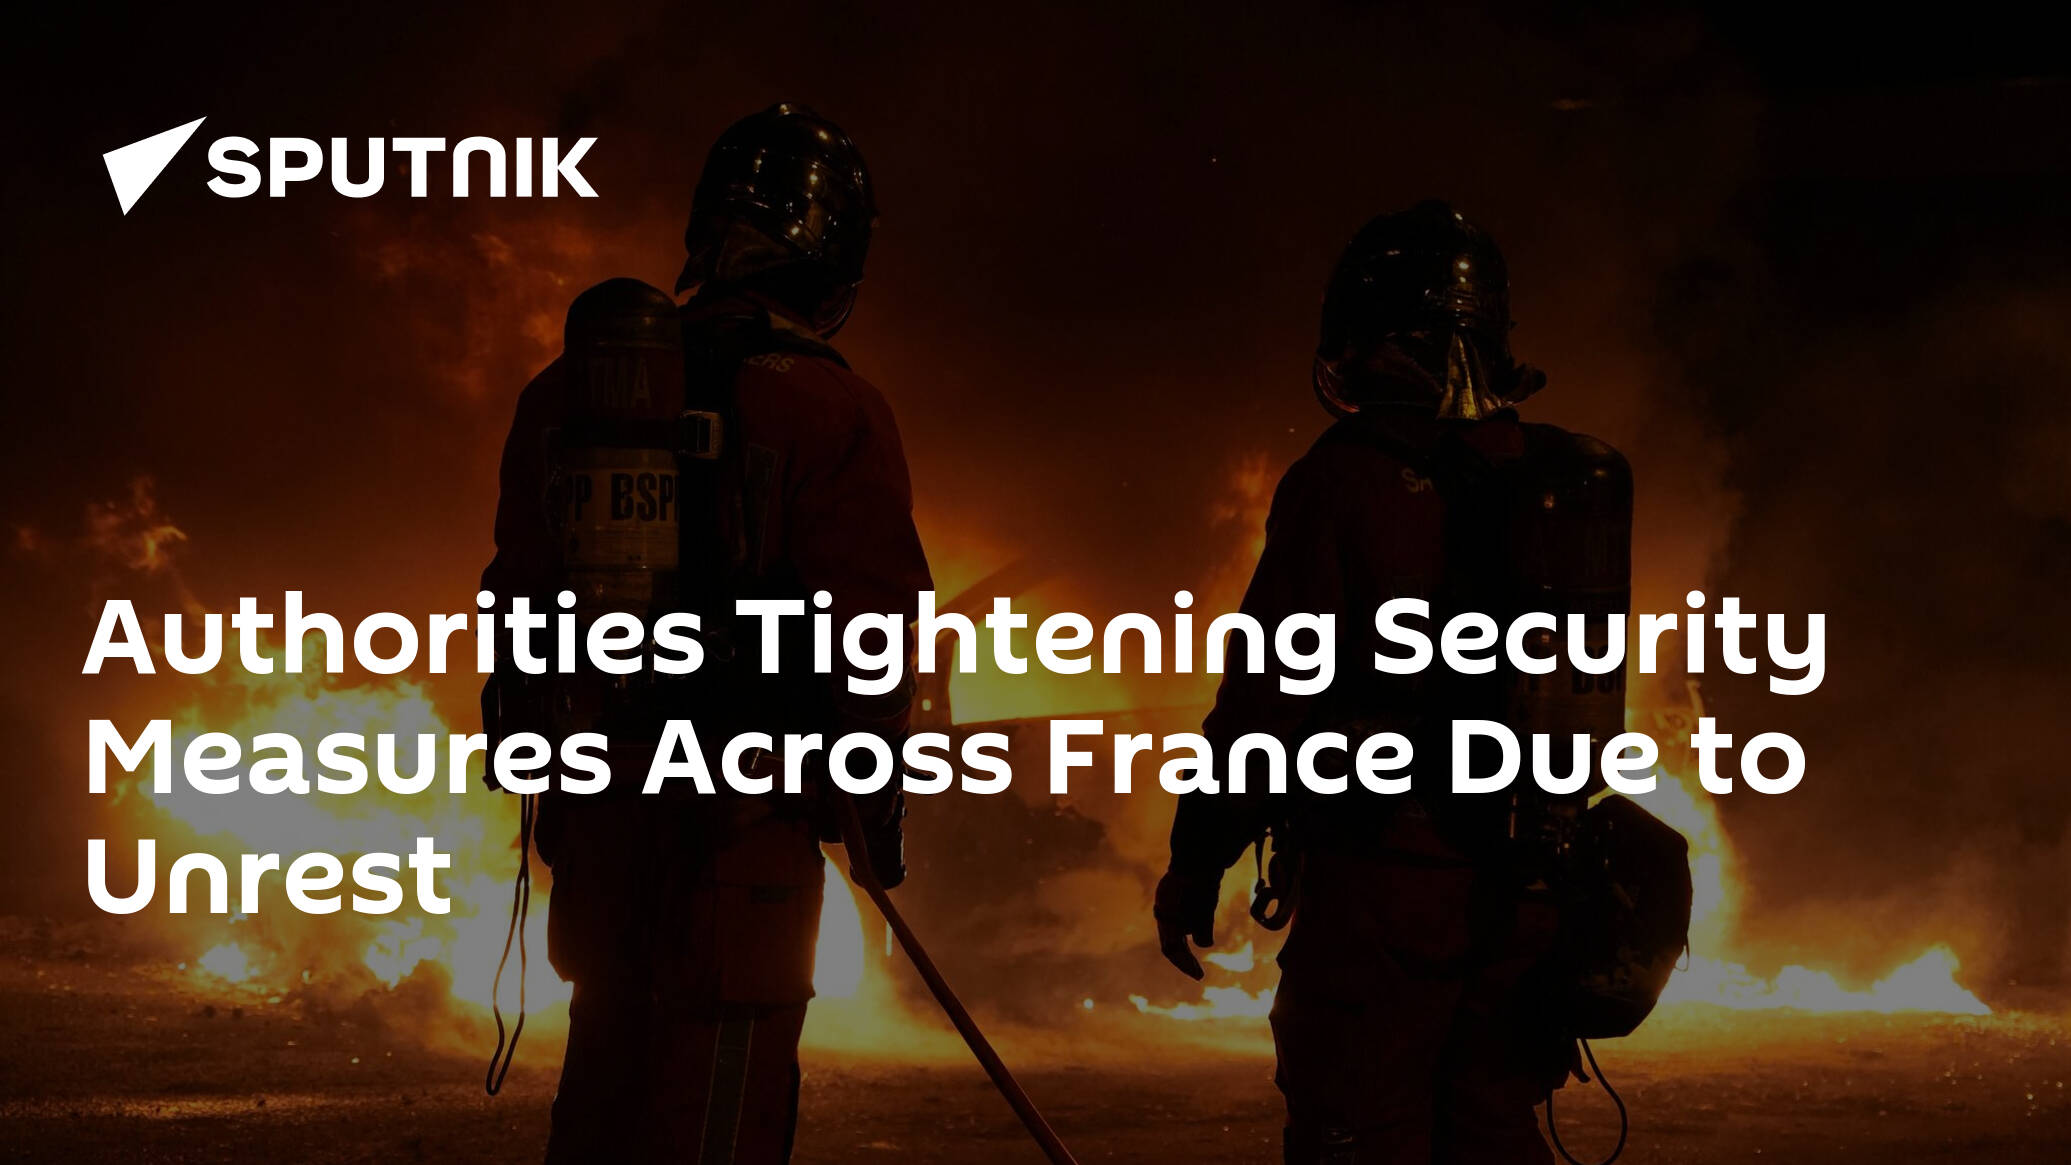 Authorities Tightening Security Measures Across France Due to Unrest